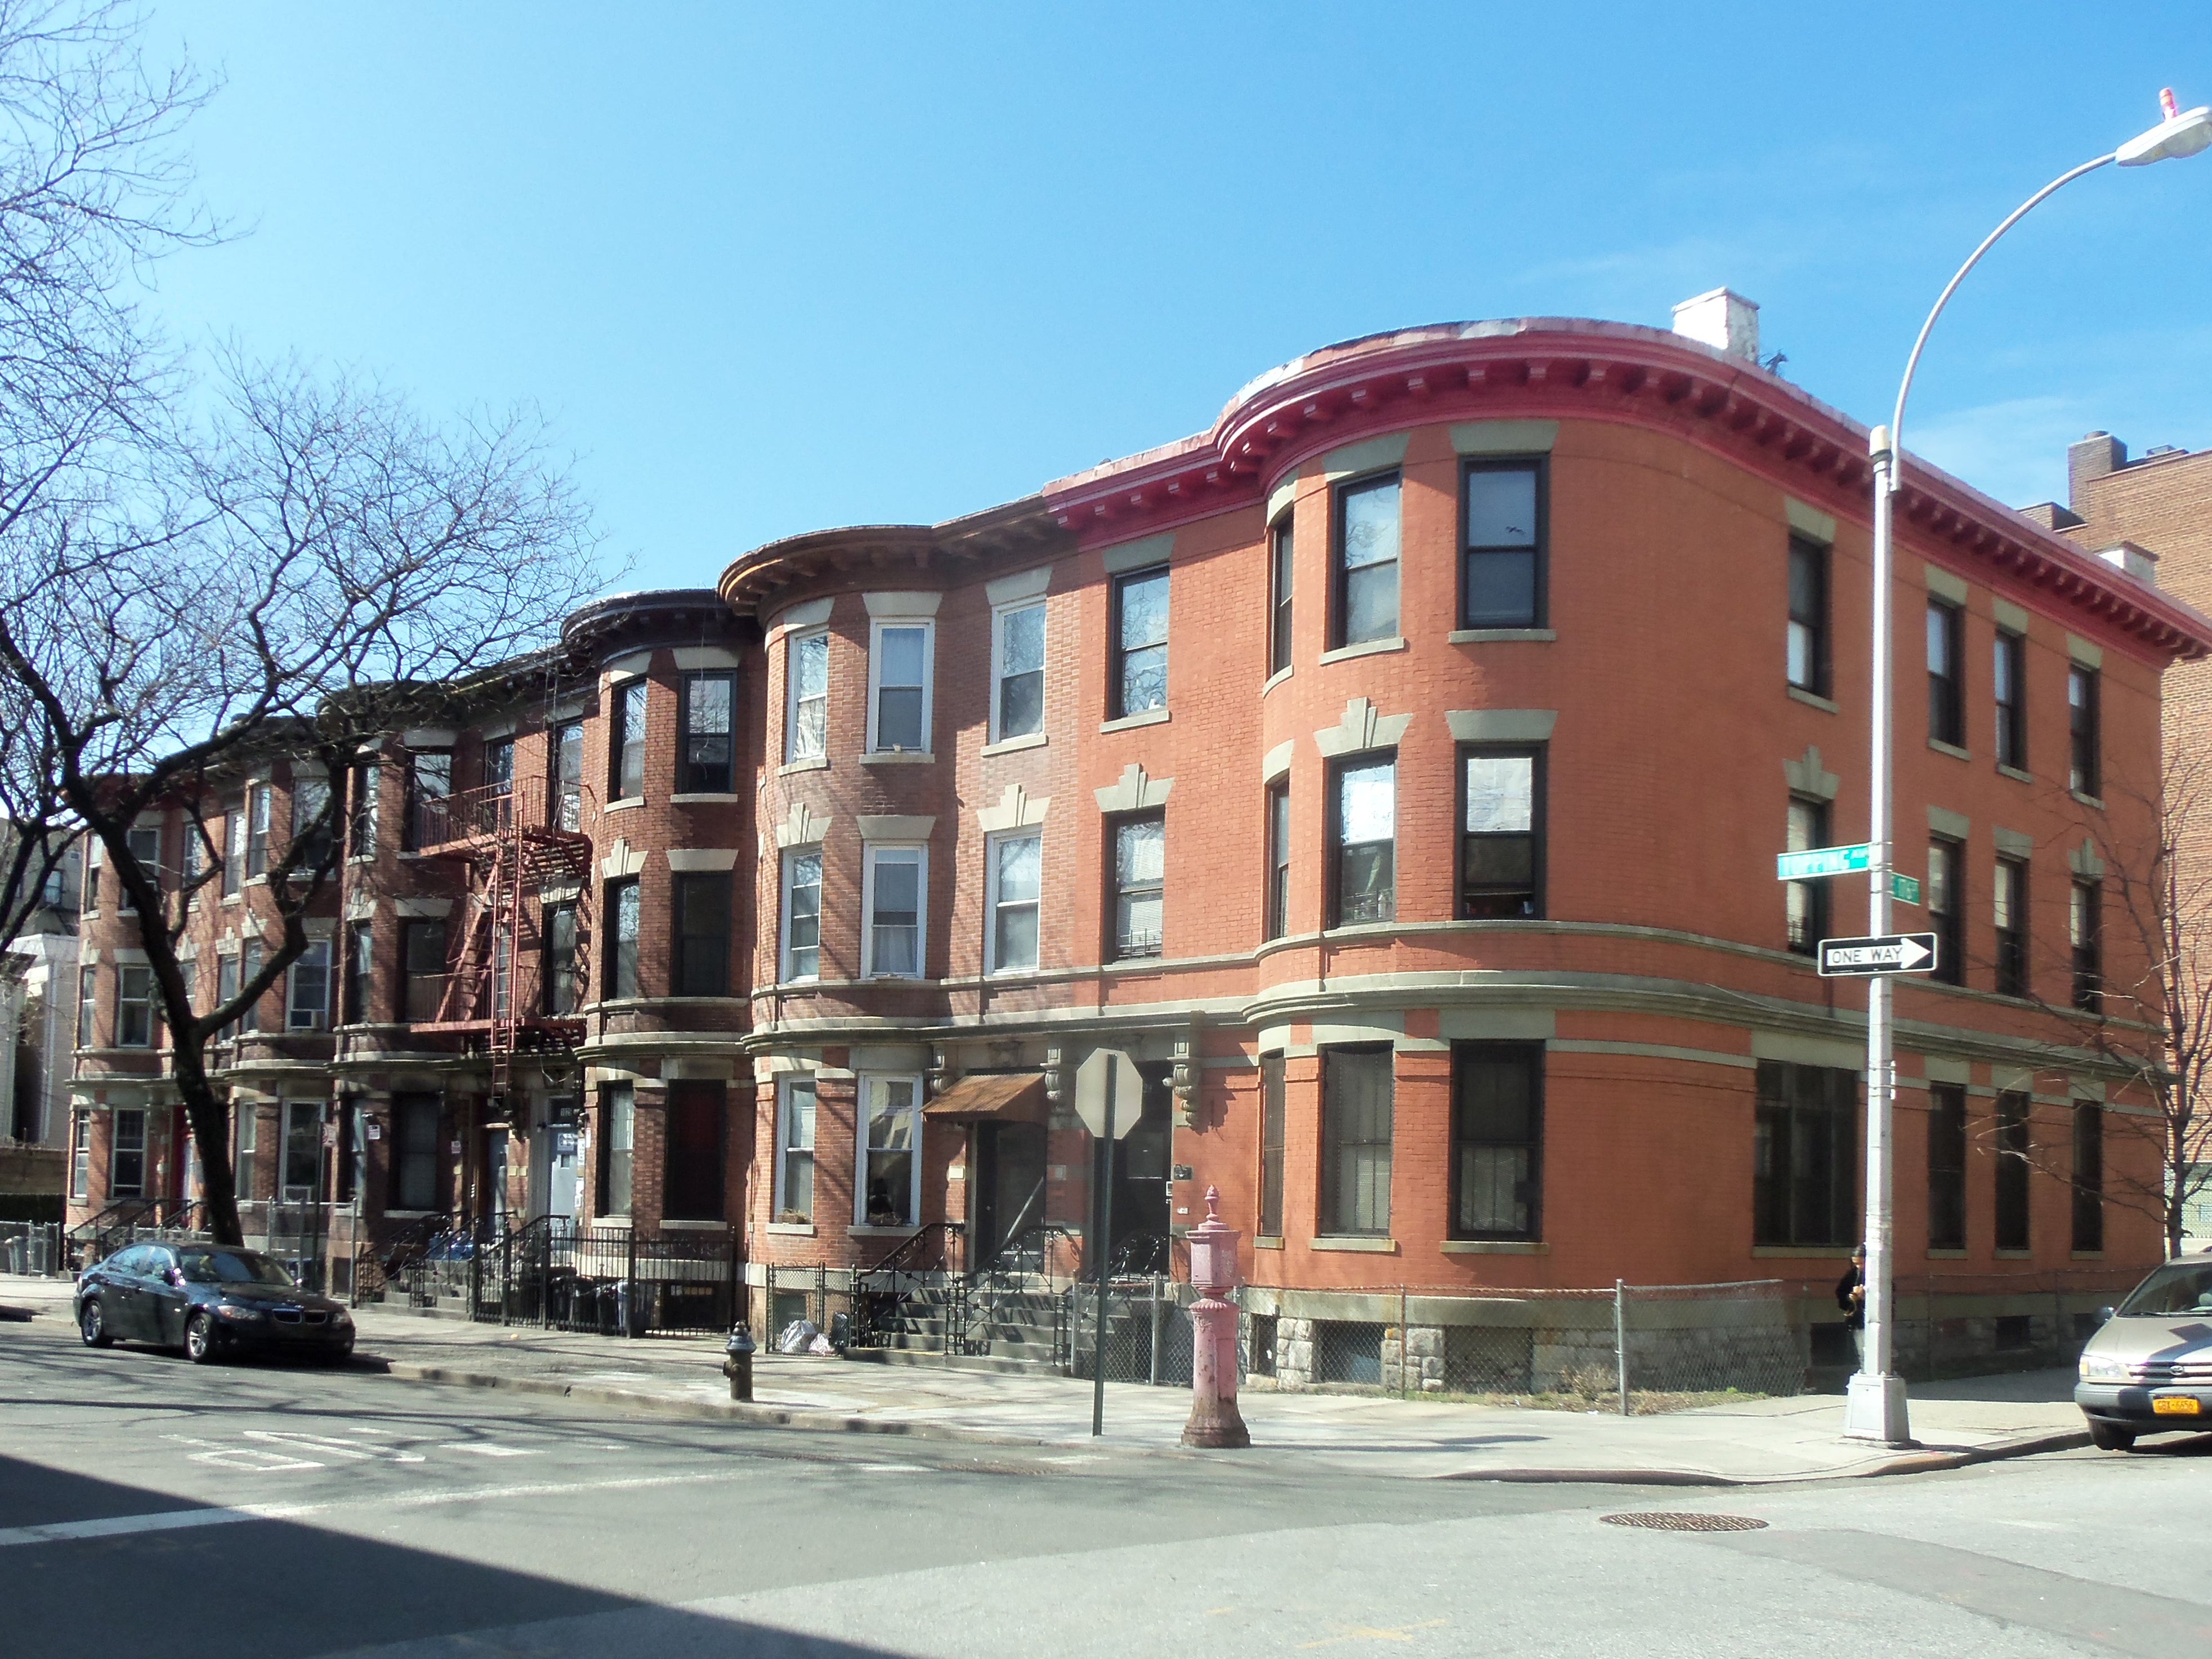 row houses on Topping Avenue at East 176th Street